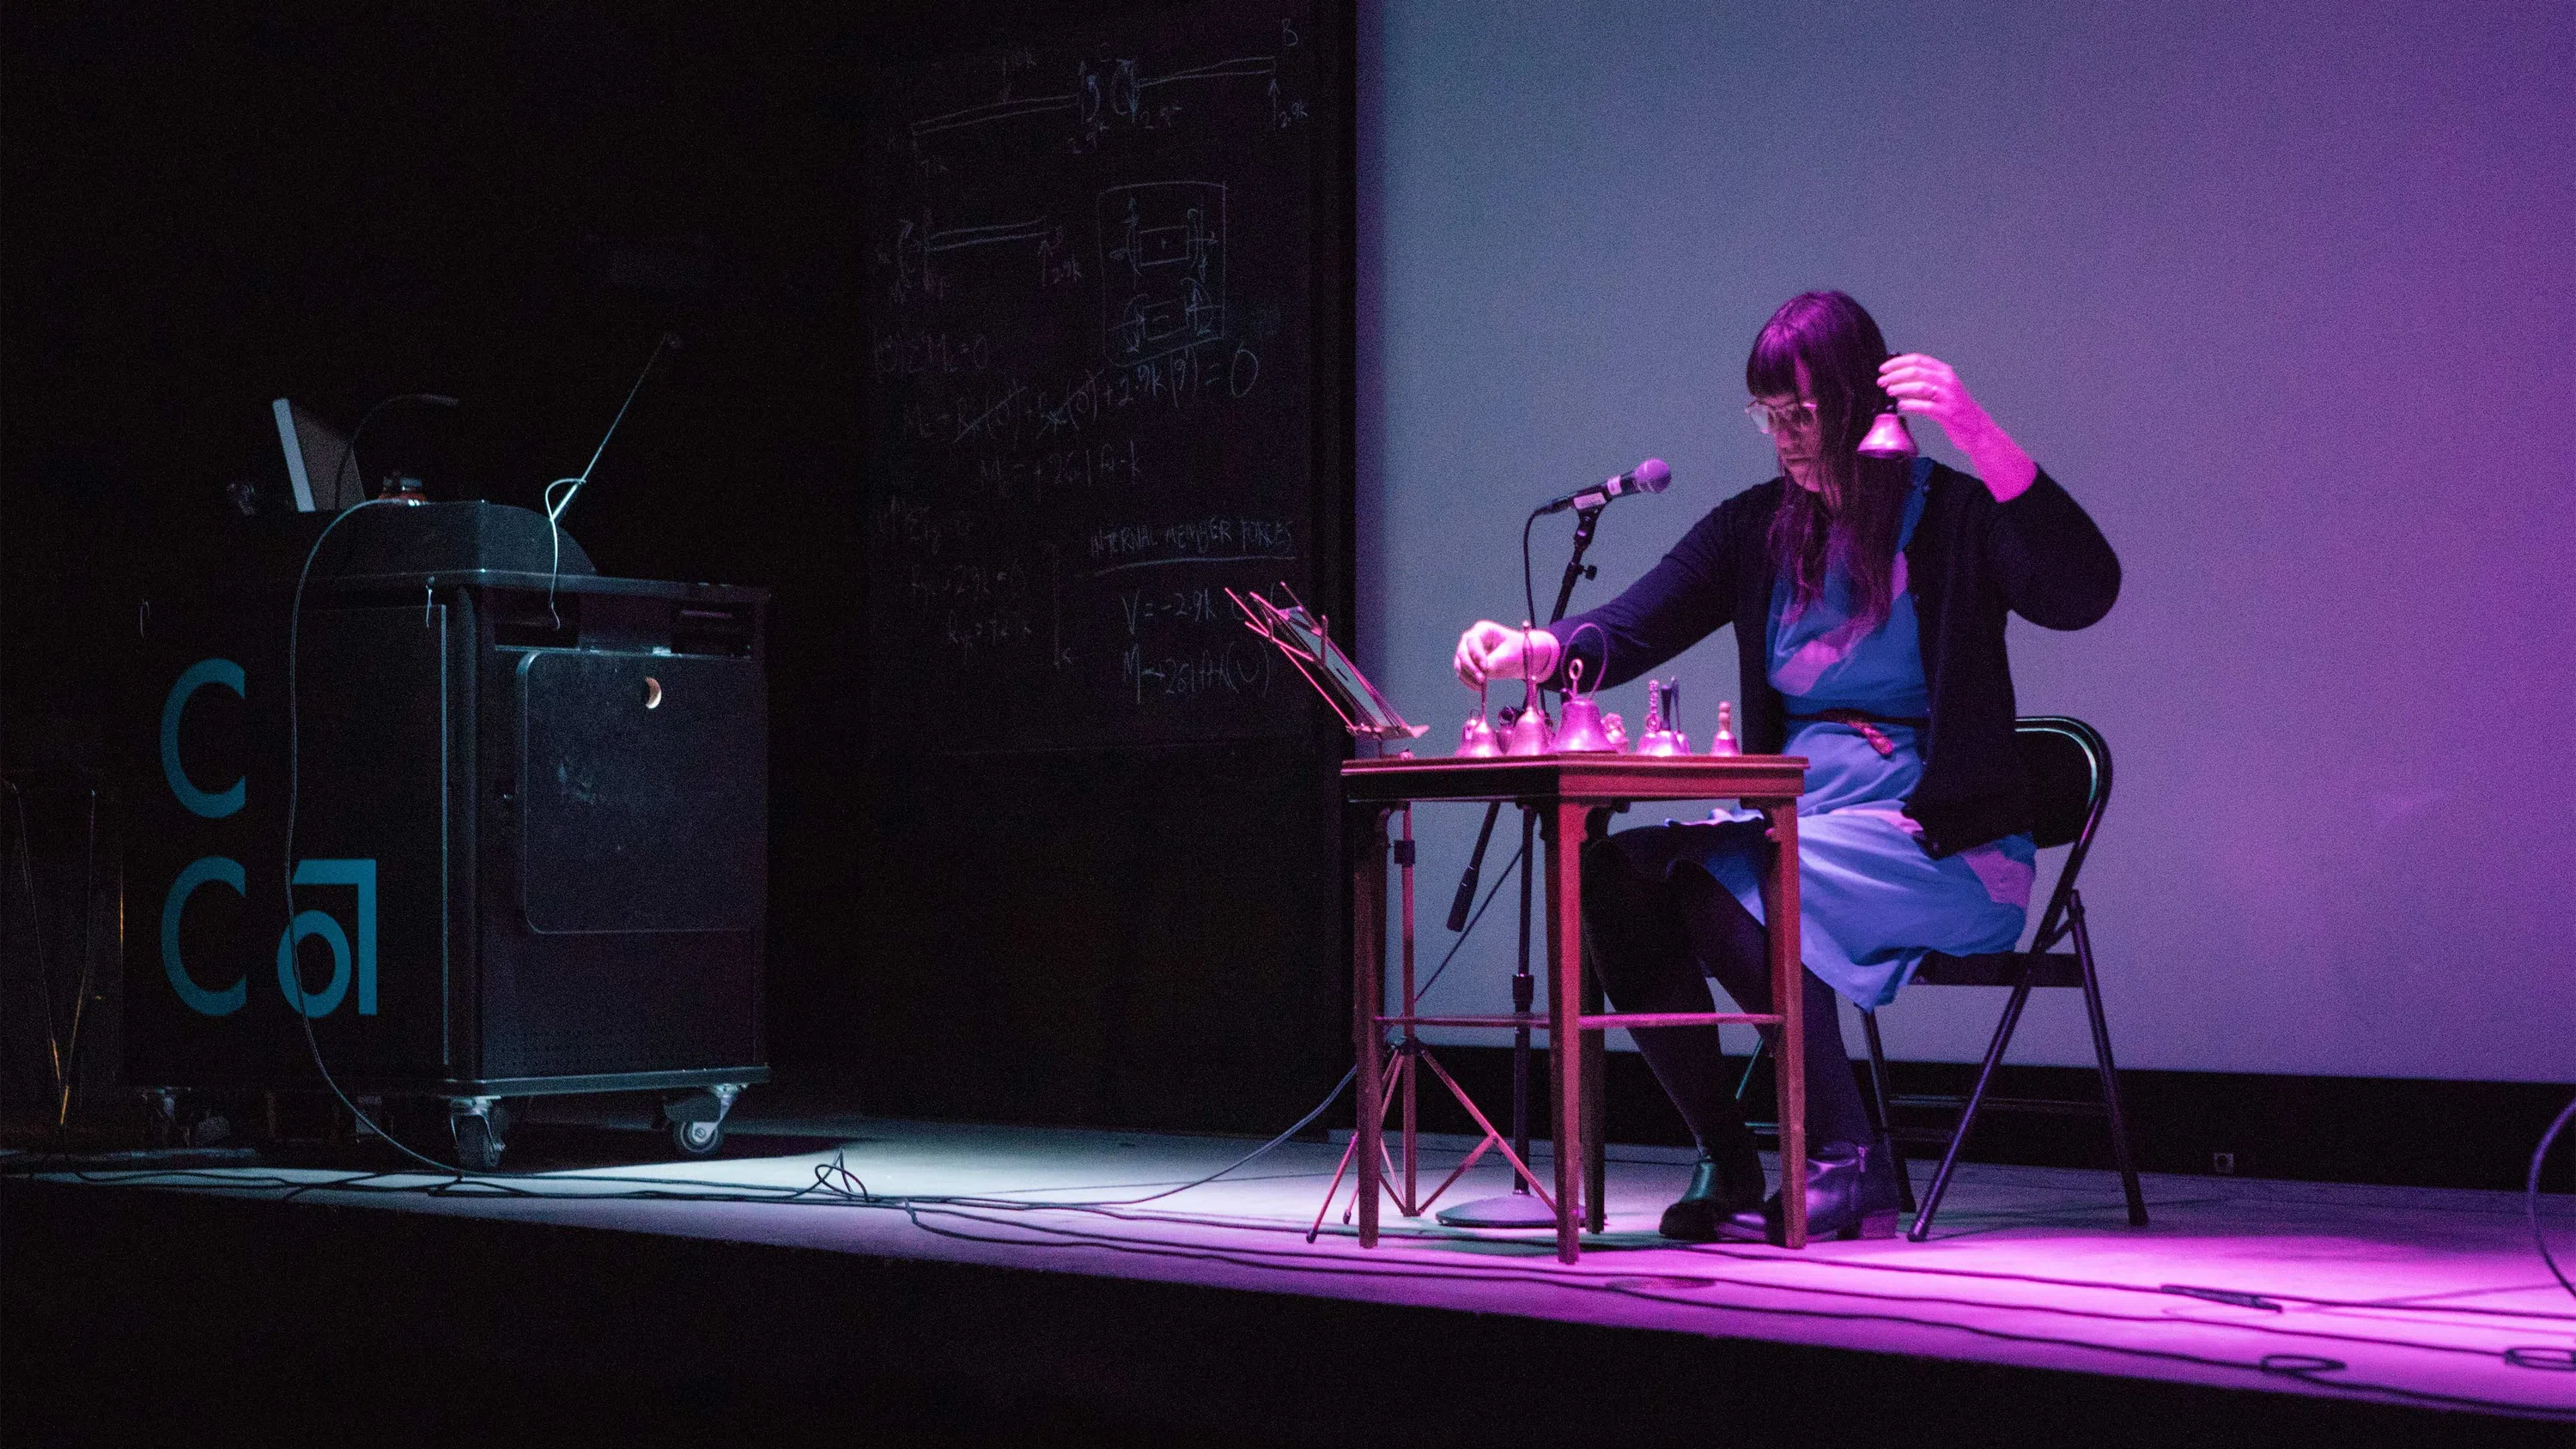 Under purple lights, a sound artist performs with chimes on stage.